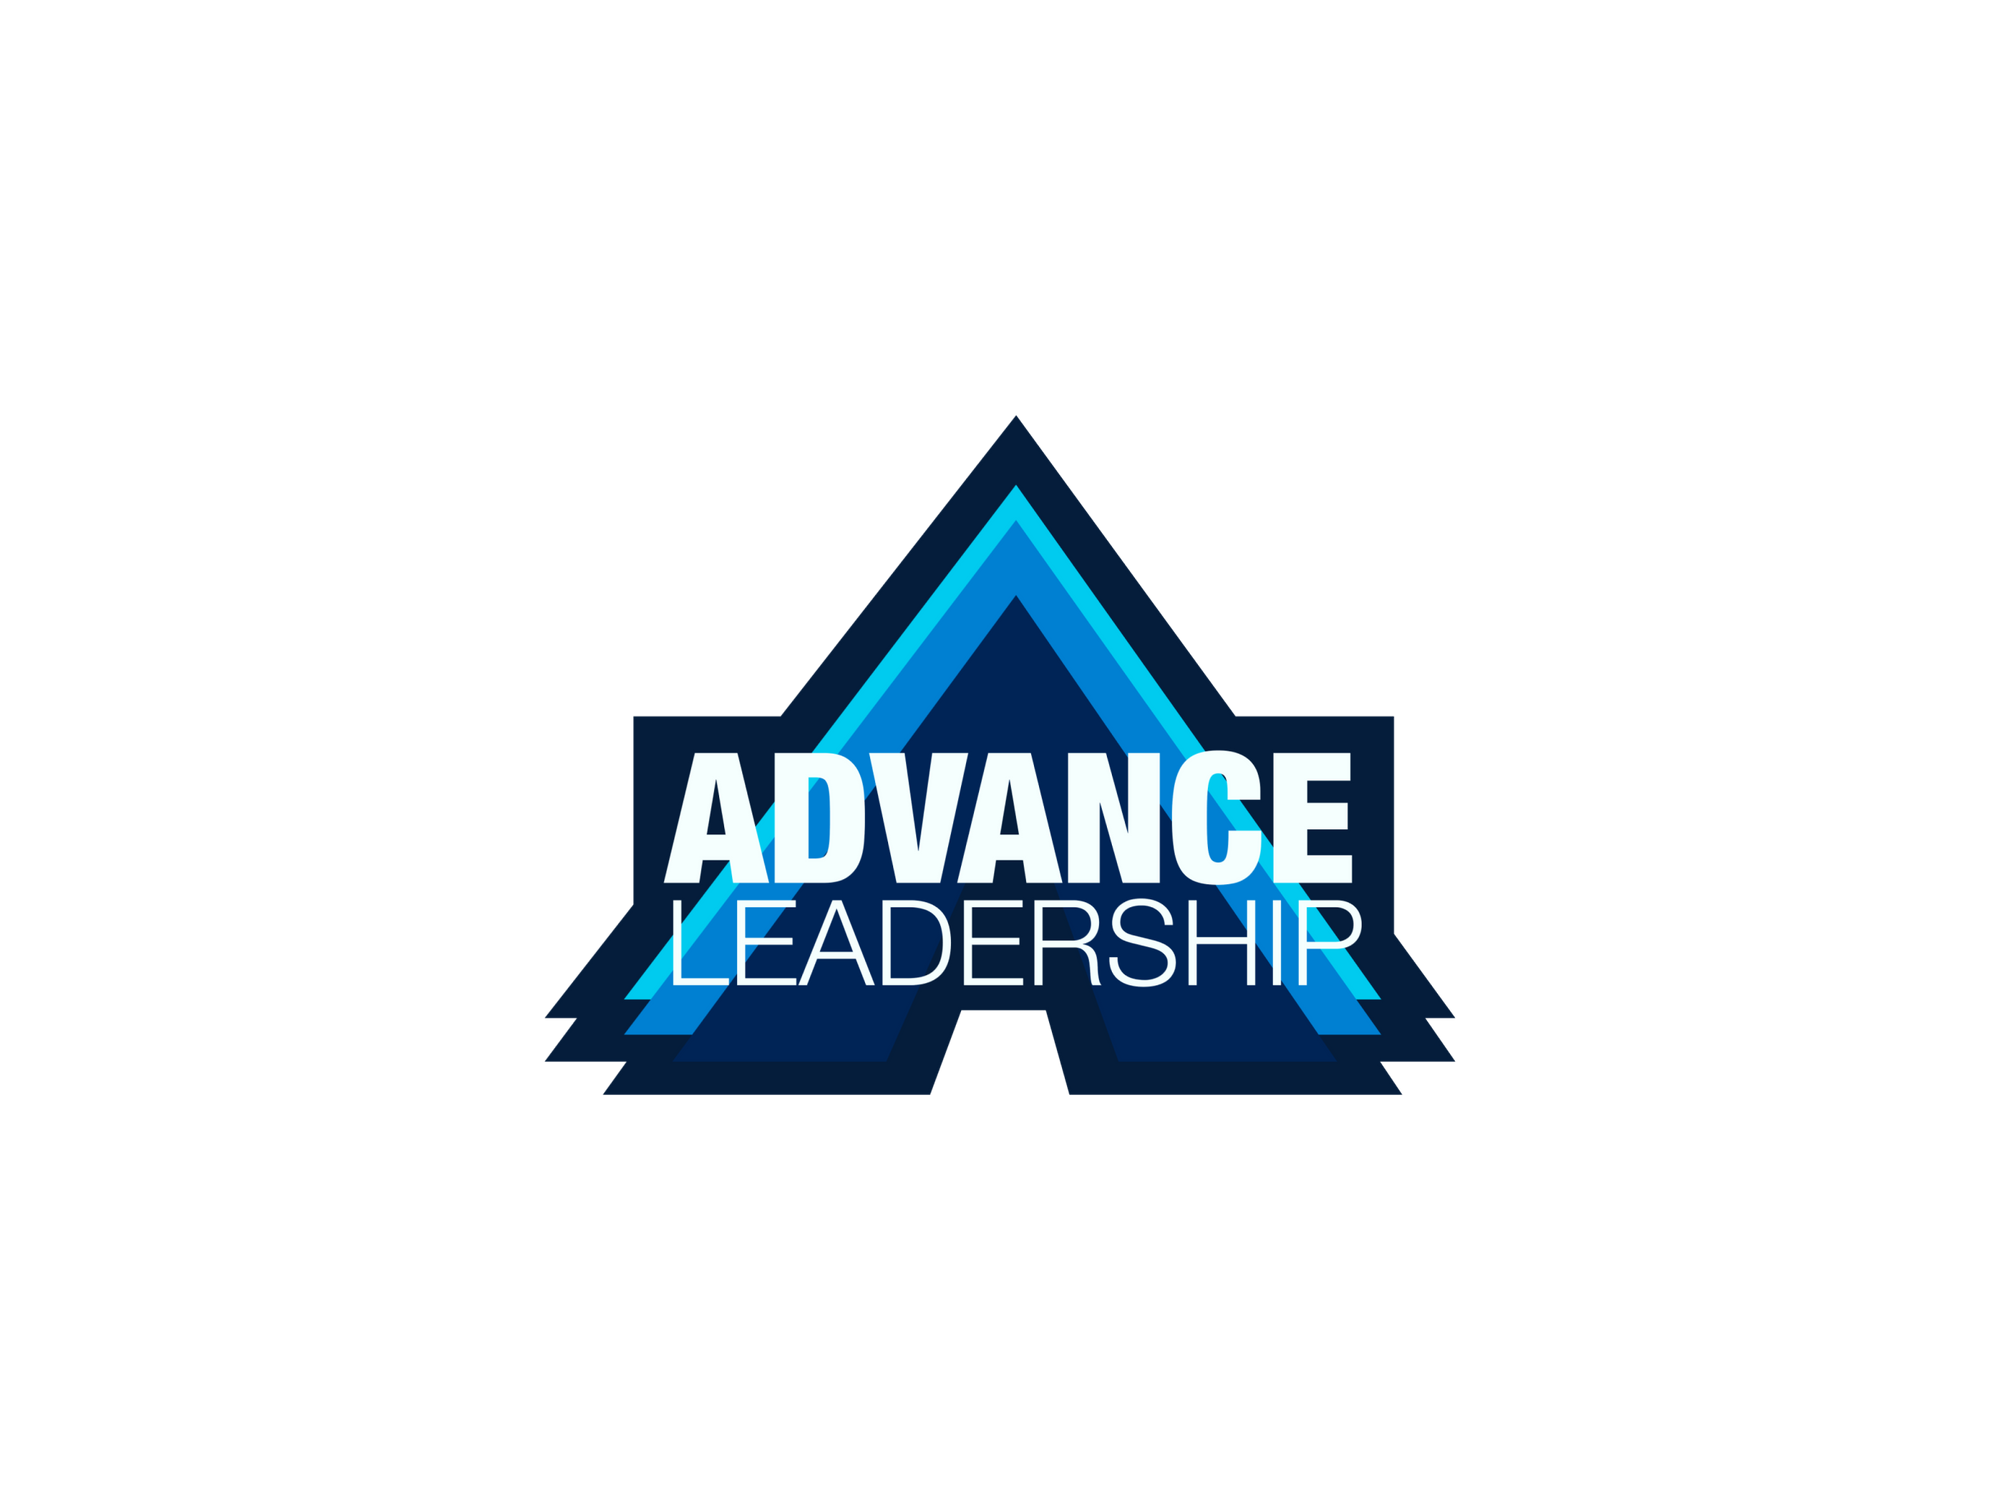 Helping Leaders Achieve Greater Results - Dave Rudin